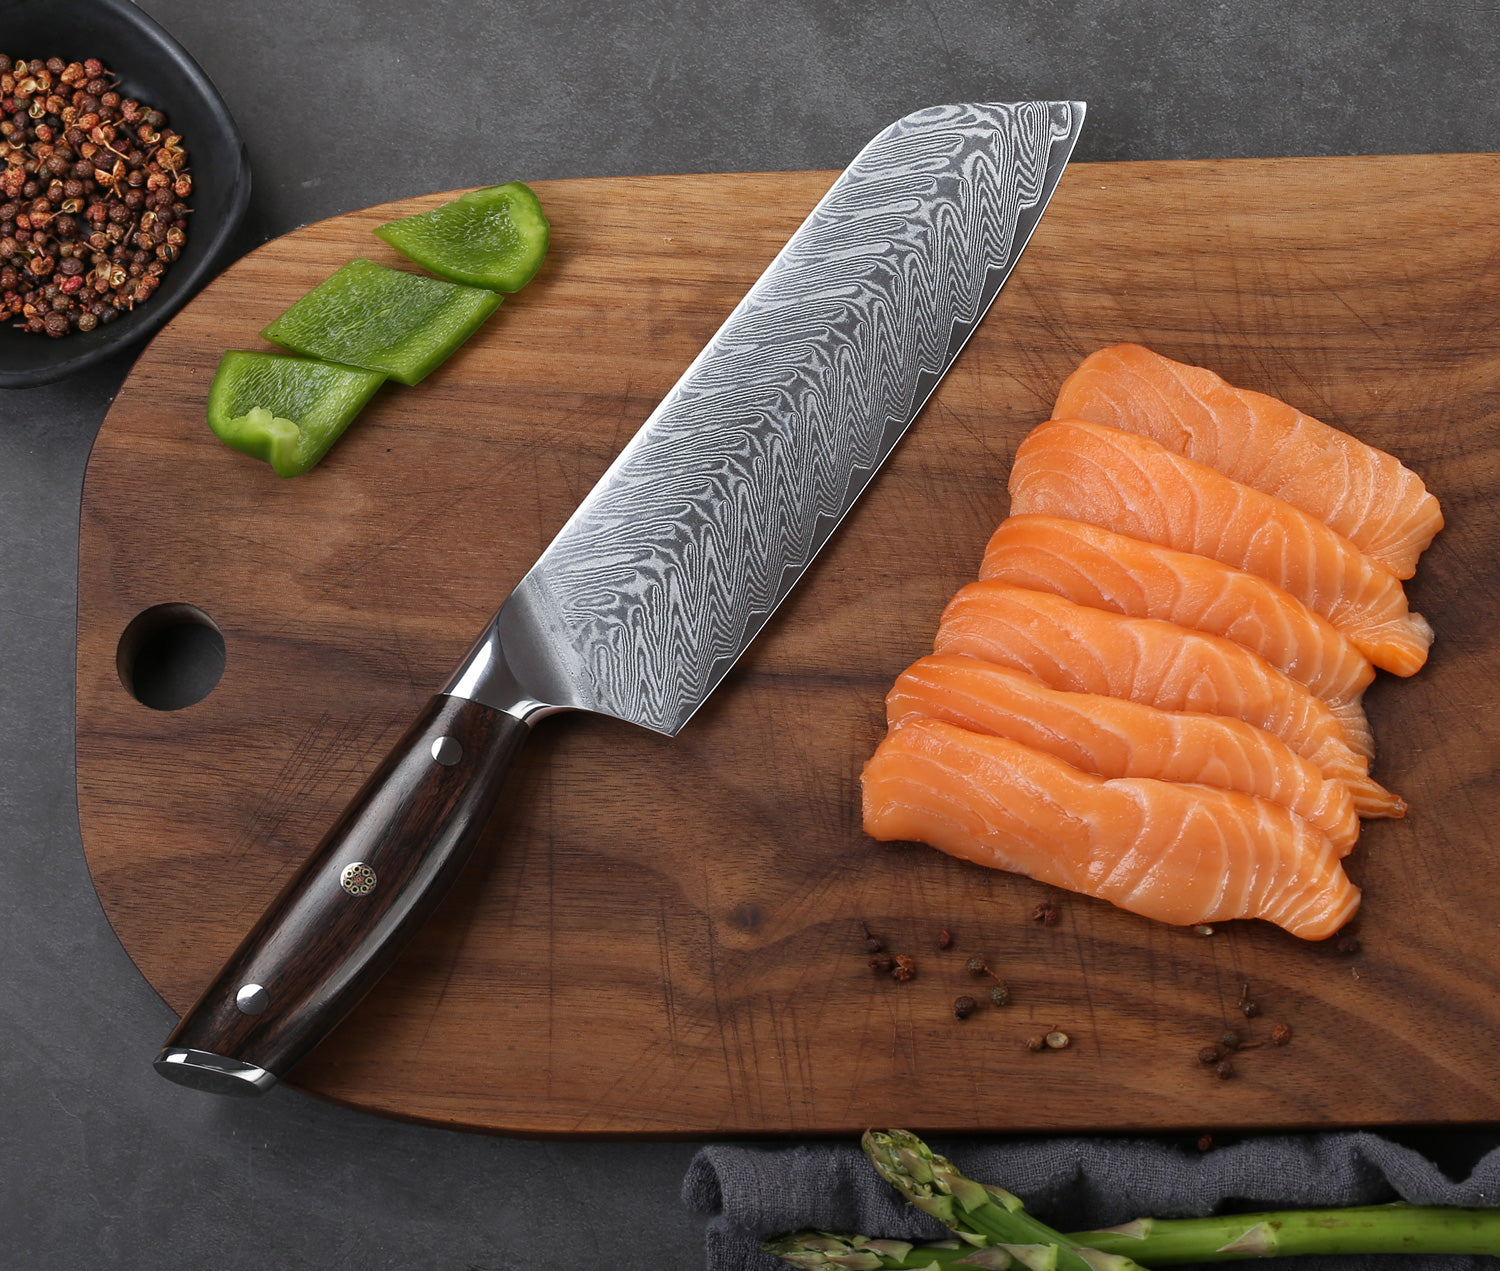 One-piece precision-stamped blade for a lighter weight knife without sacrificing strength